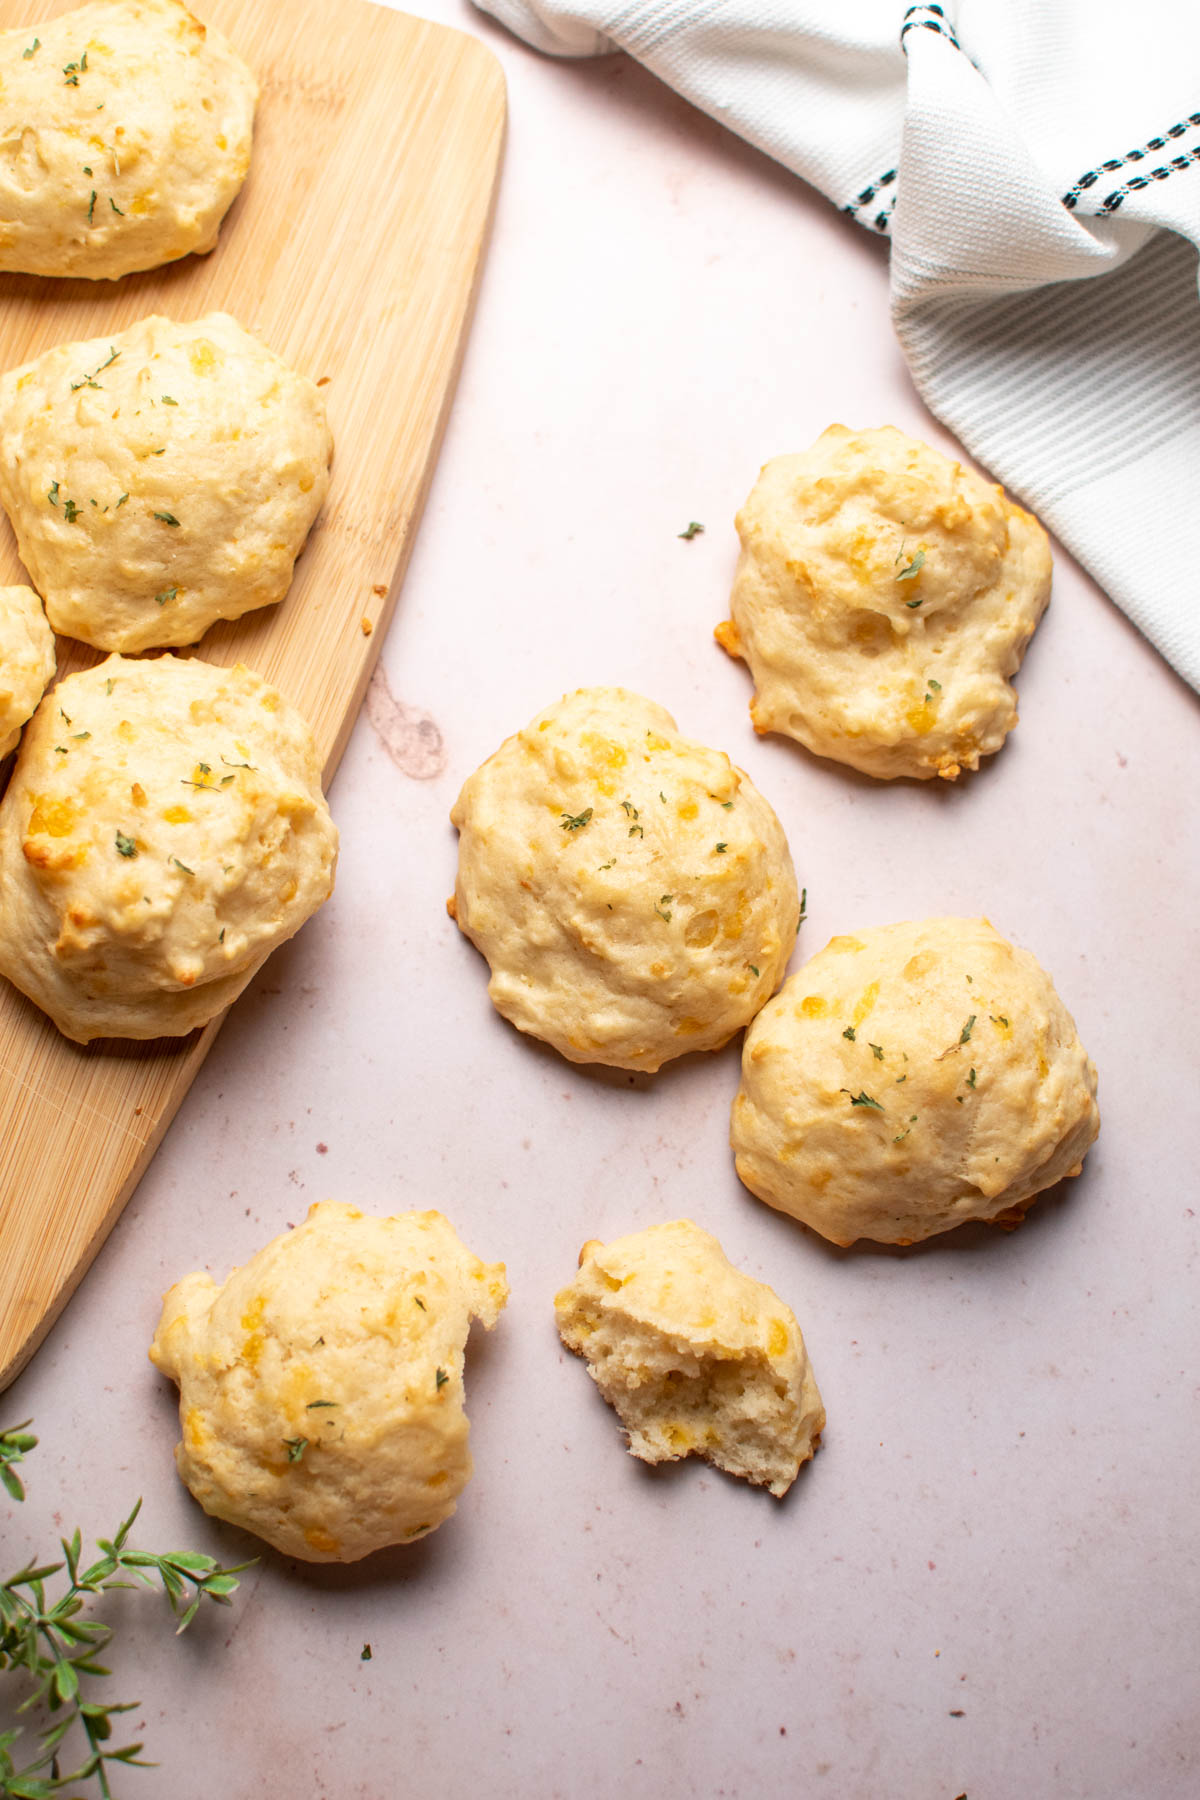 Several cheesy biscuits without butter on counter and wood cutting board.